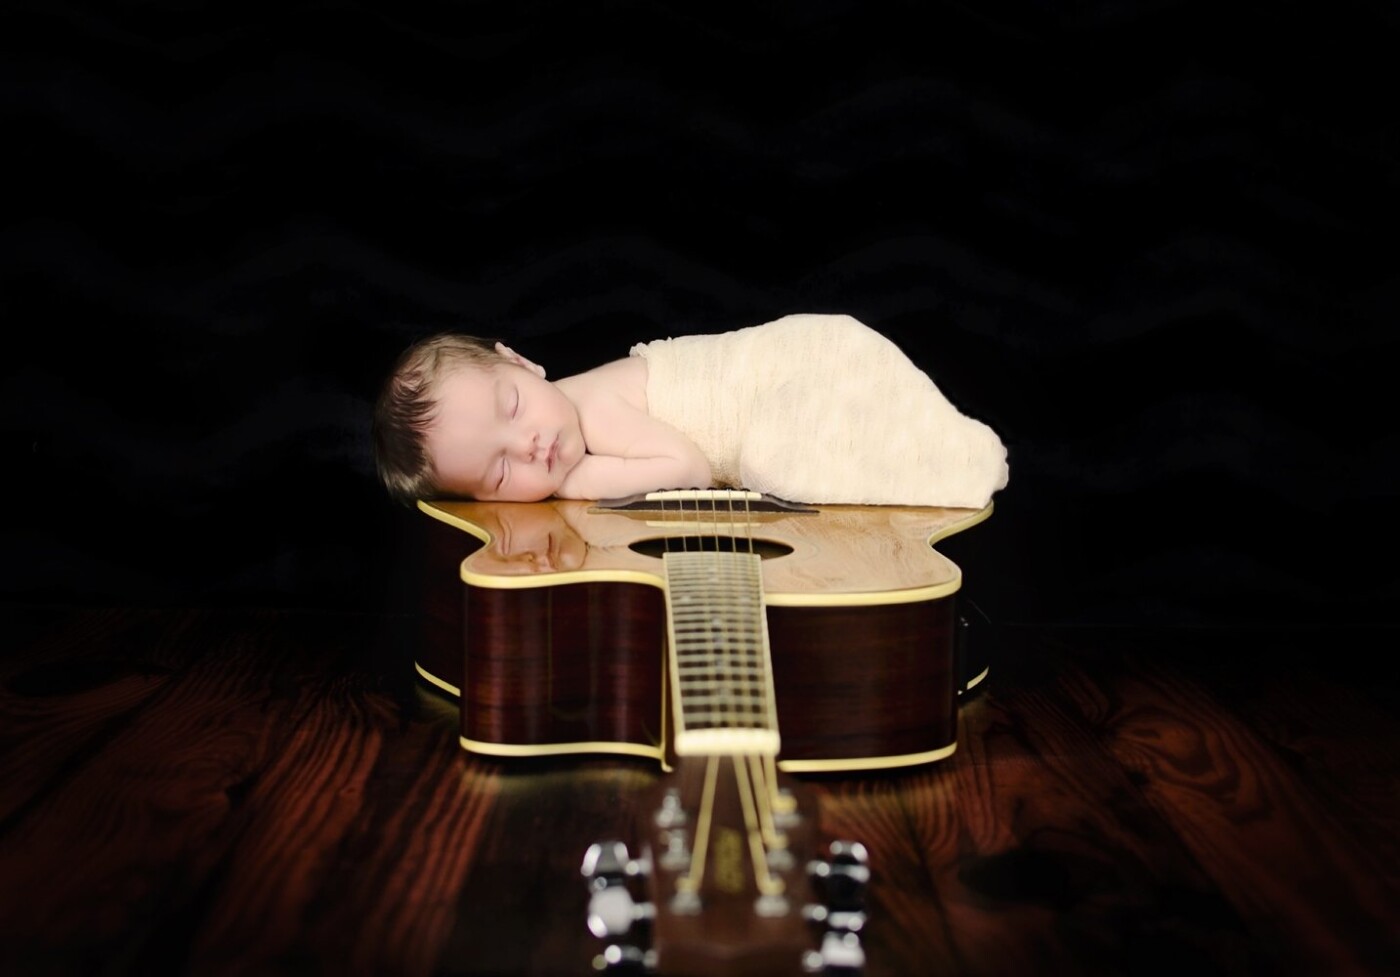 This is Braxton 12 Days. His Dad plays in the band at church and really wanted to incorporate the guitar in some way with their sweet boy!I Loved his reflection in the guitar!